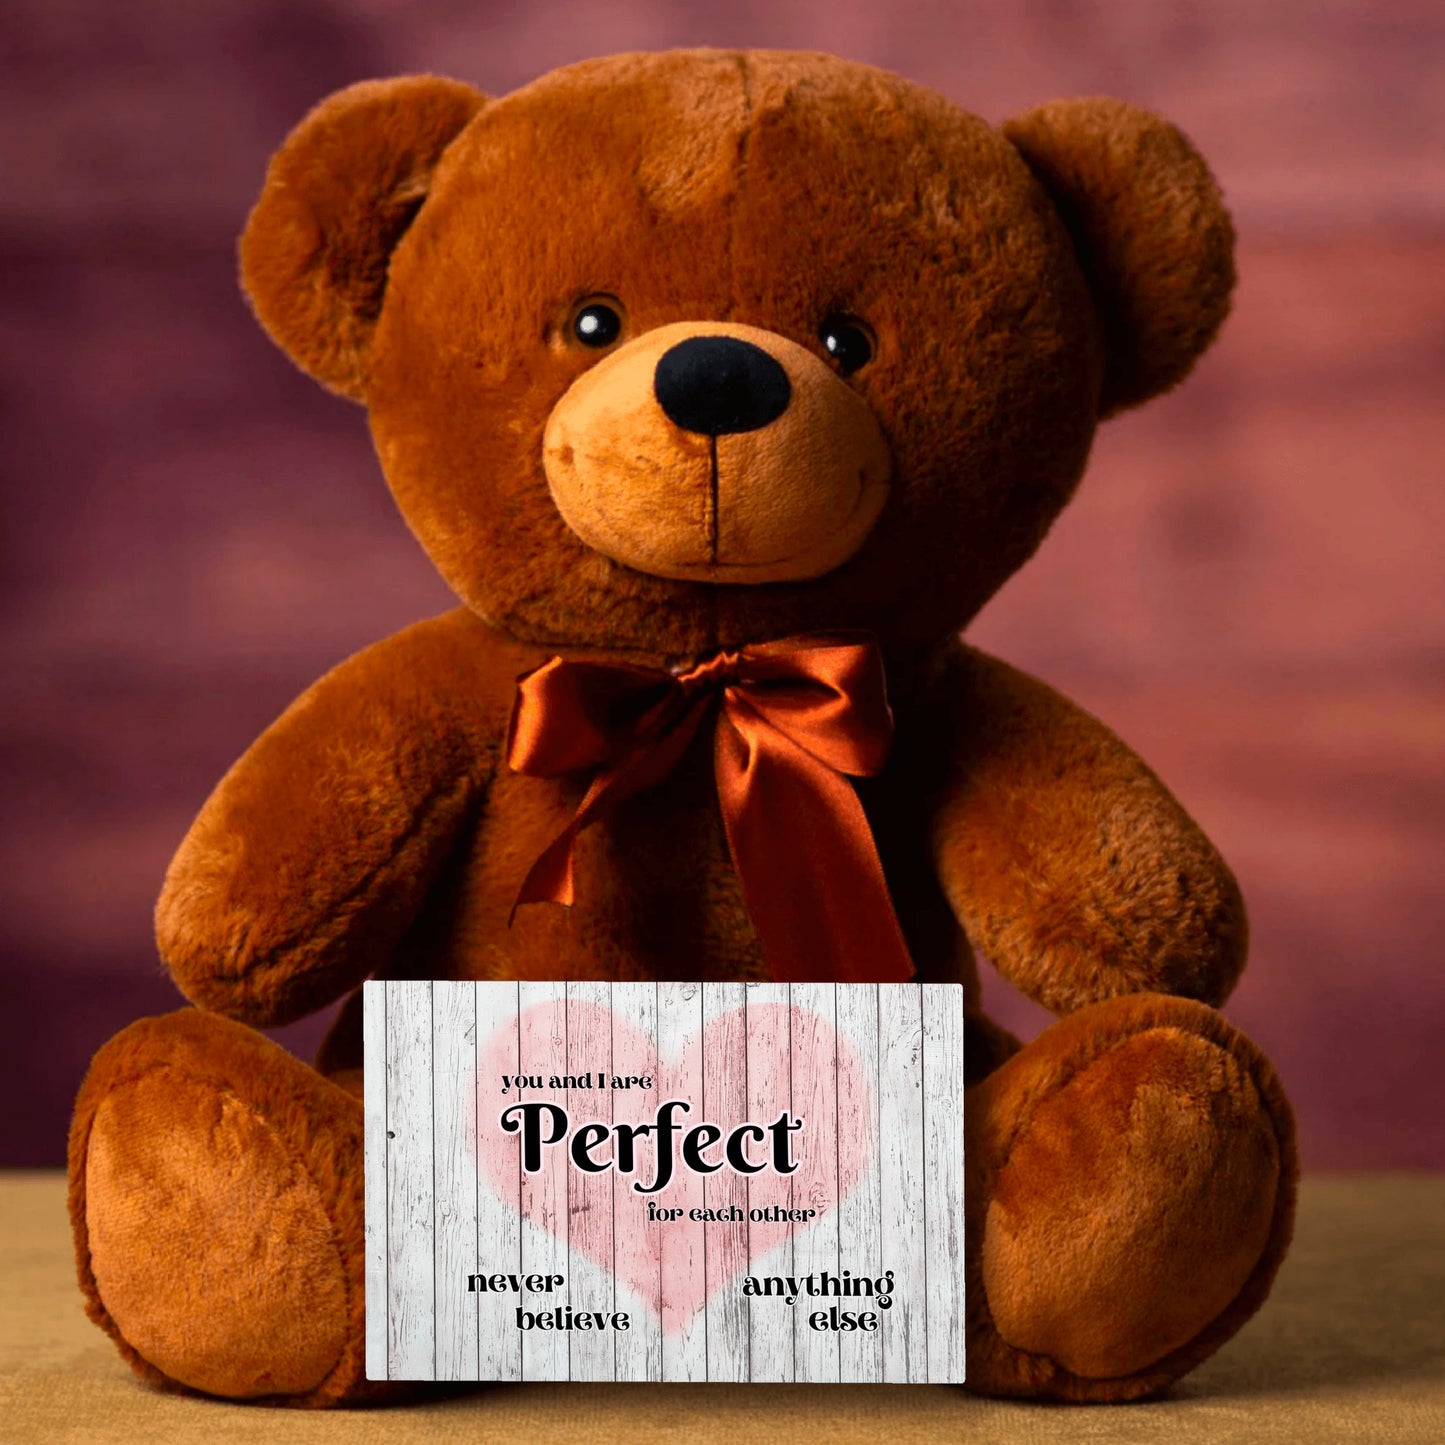 You and I are Perfect for each other, never believe anything else - Teddy Bear with sign